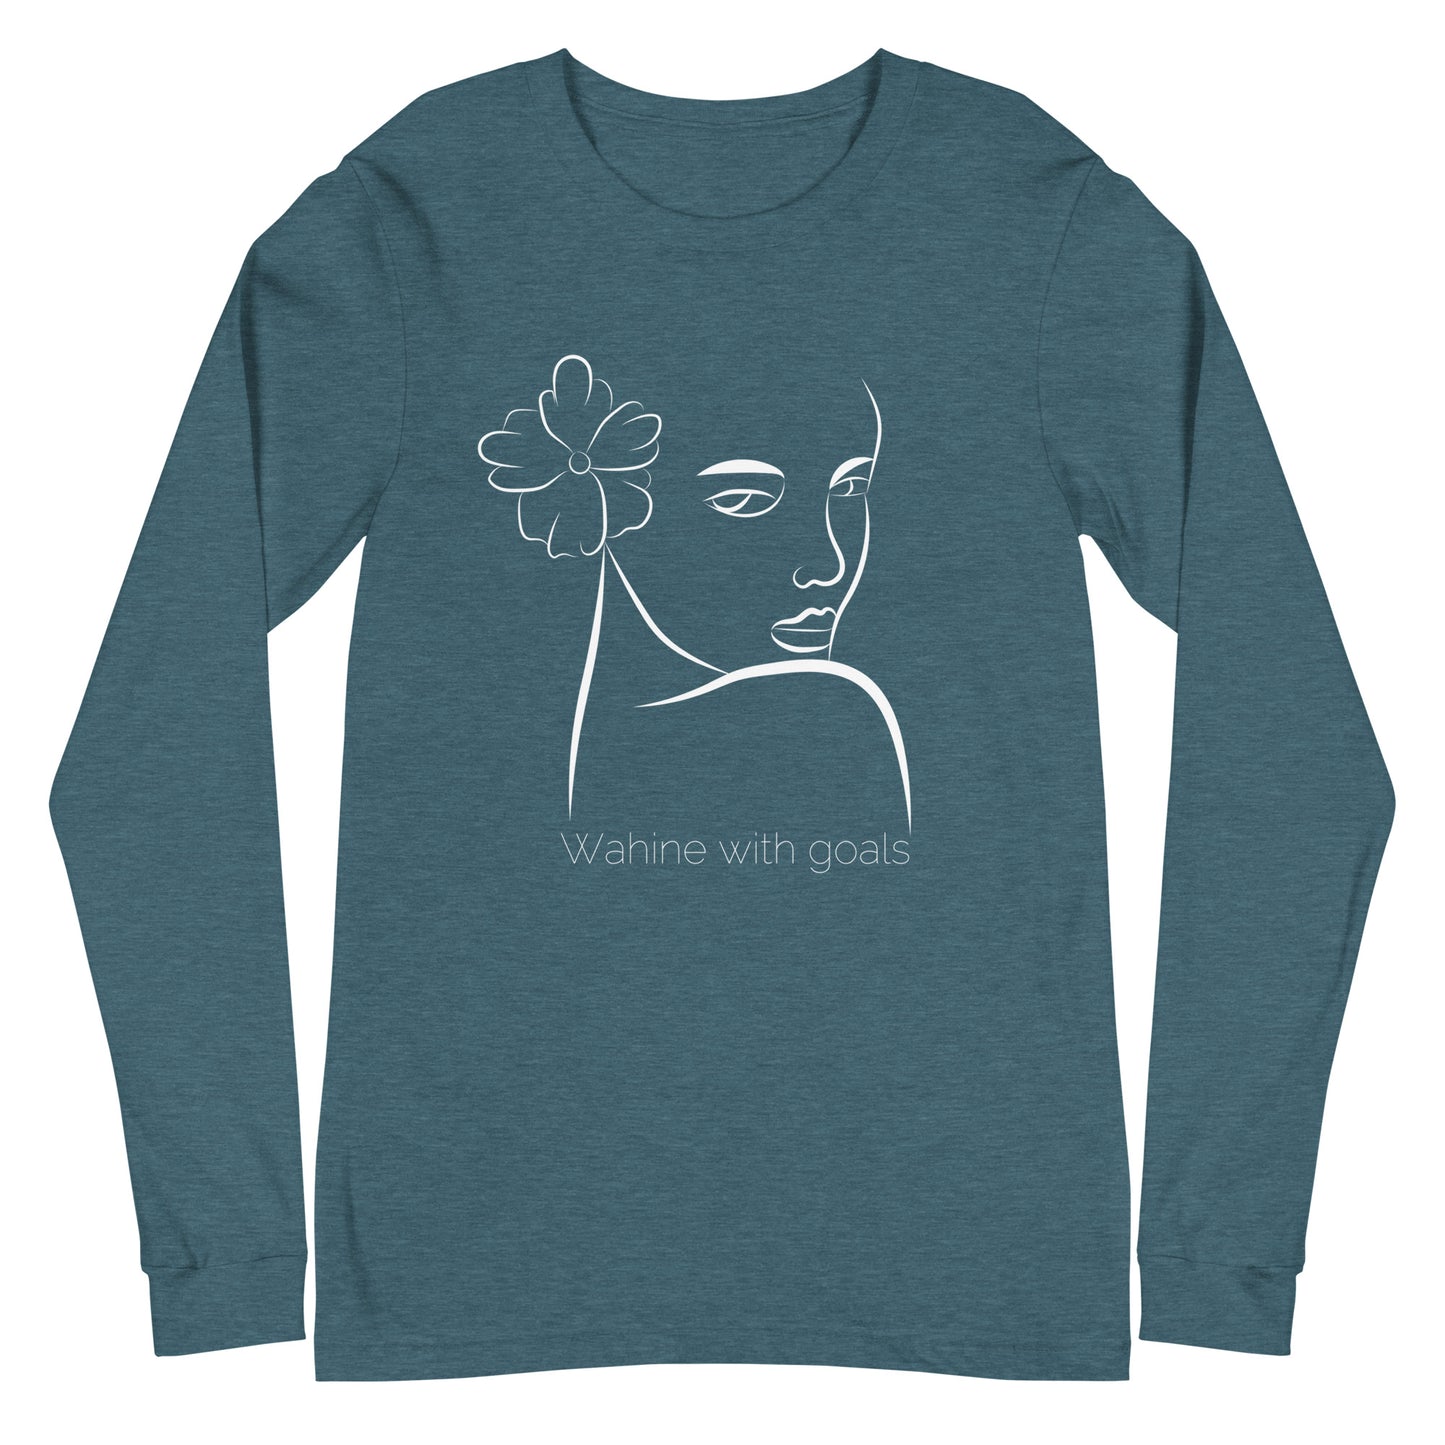 Wahine with goals long sleeve t-shirt